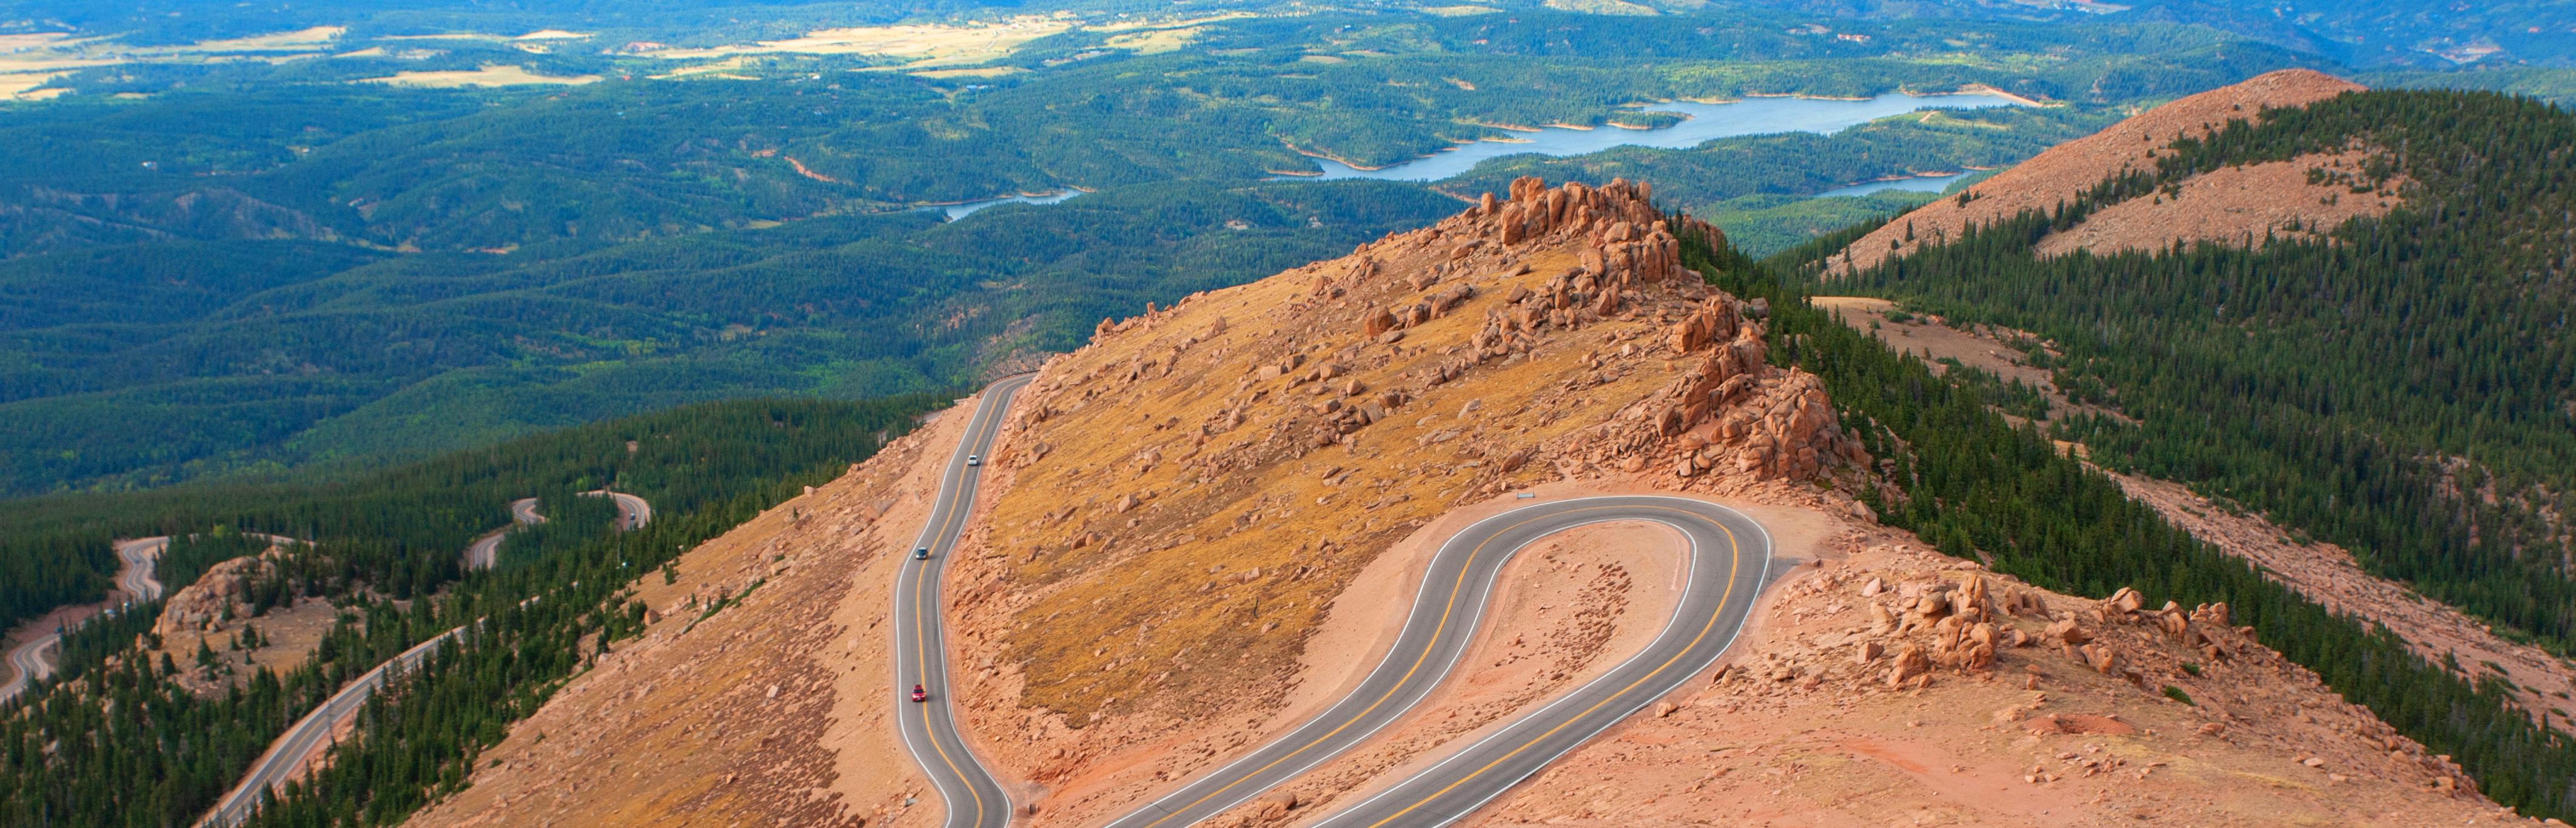 aerial view of the Pikes Peak Highway and surrounding valleys